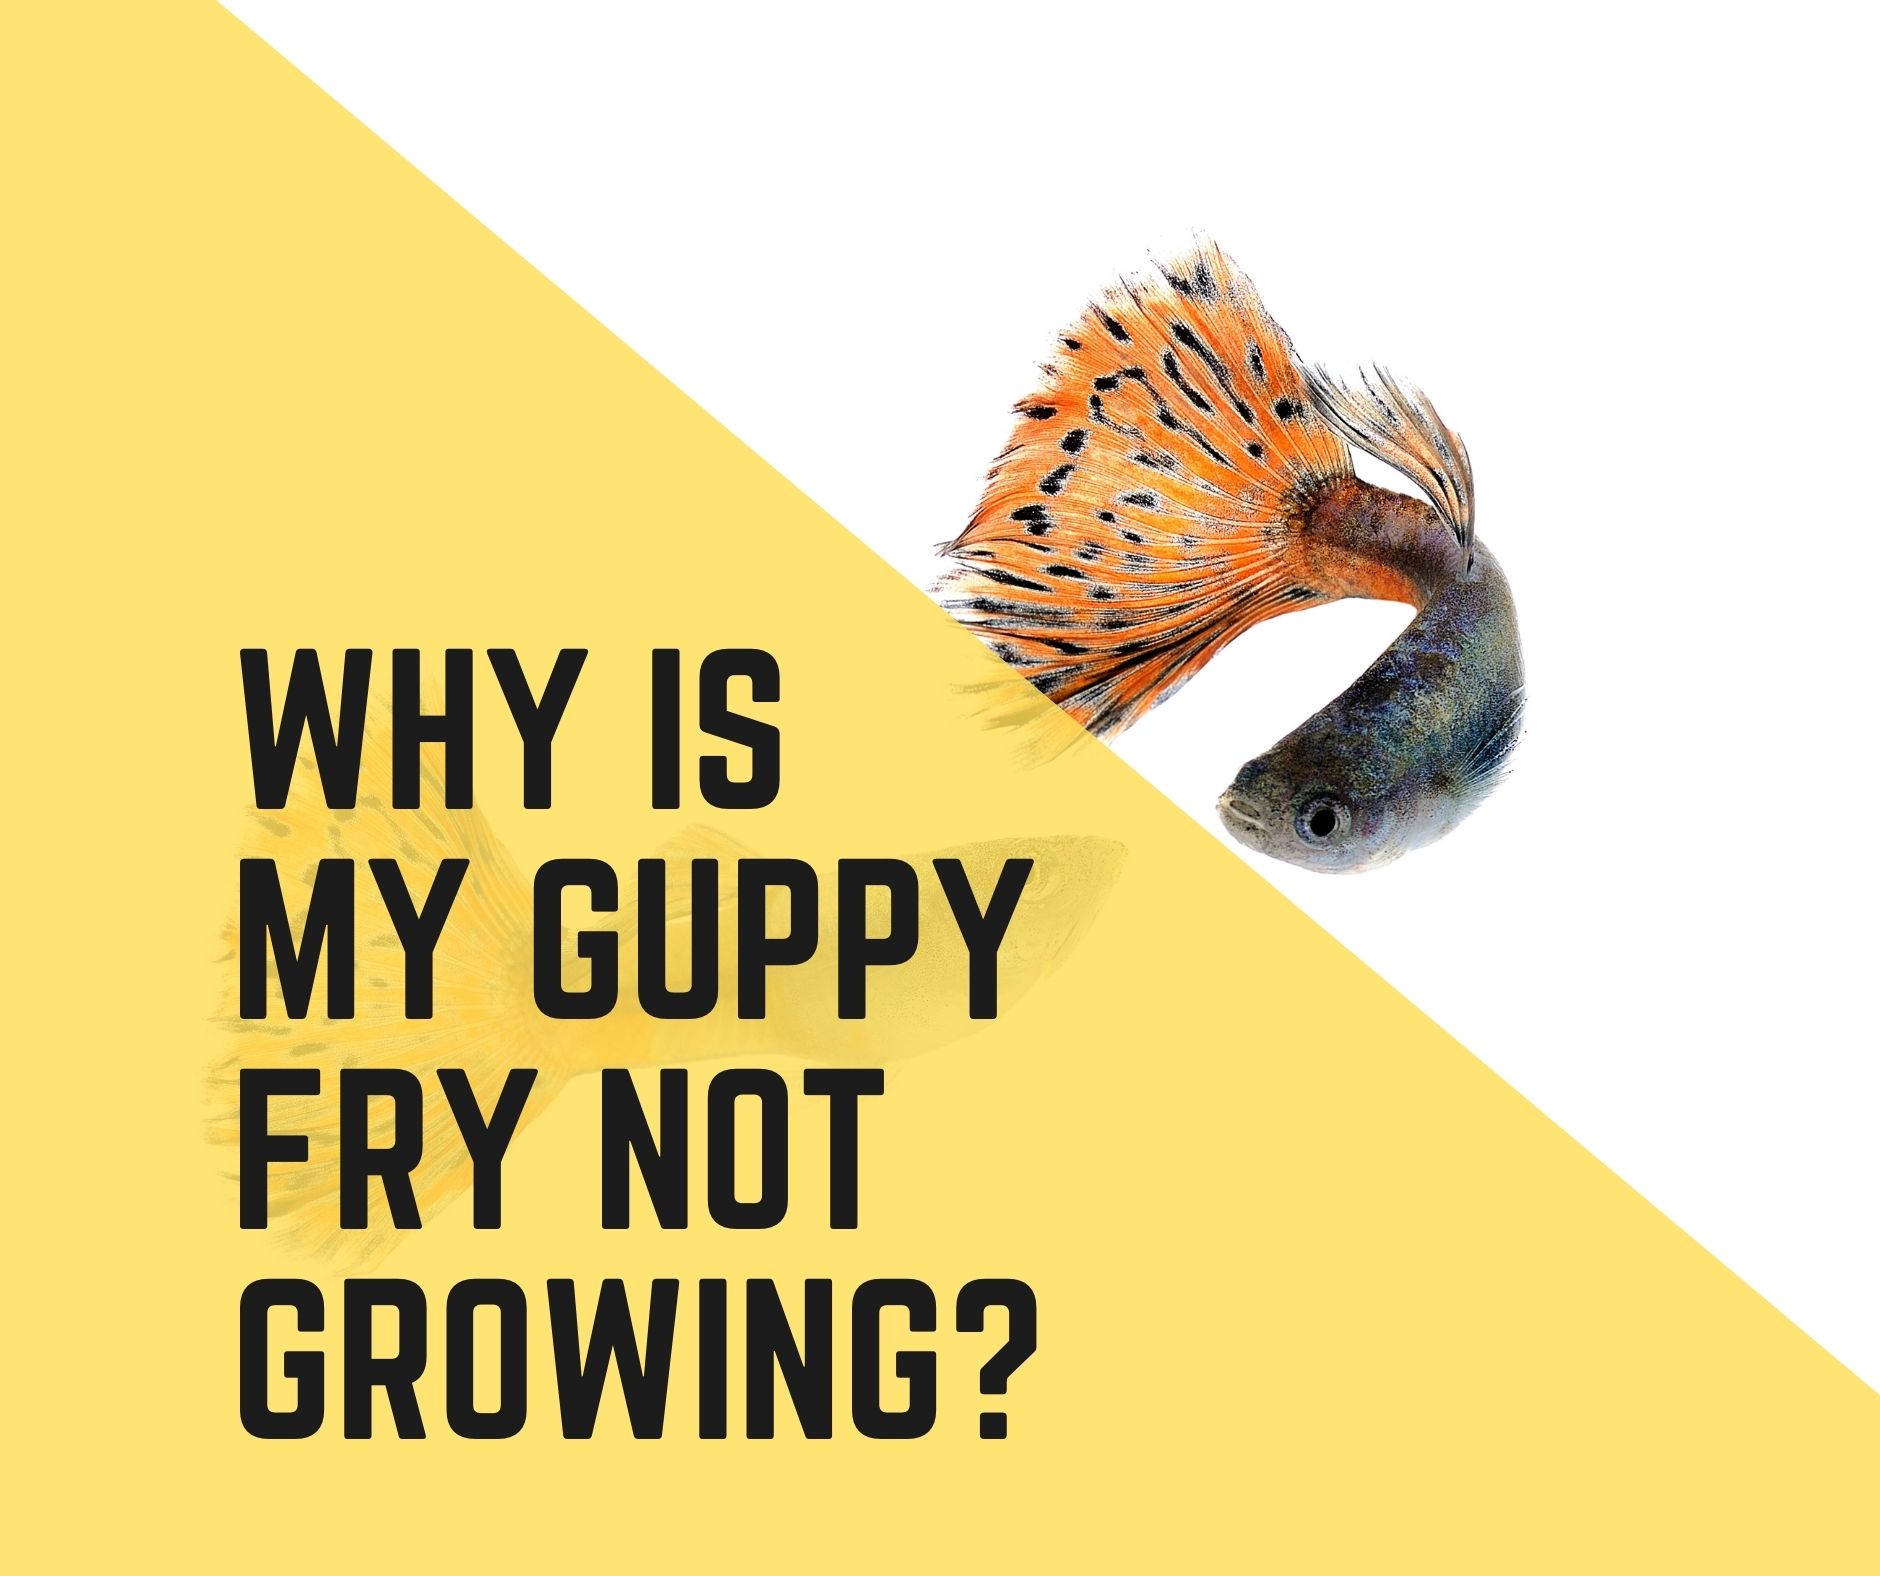 Why Is My Guppy Fry Not Growing?